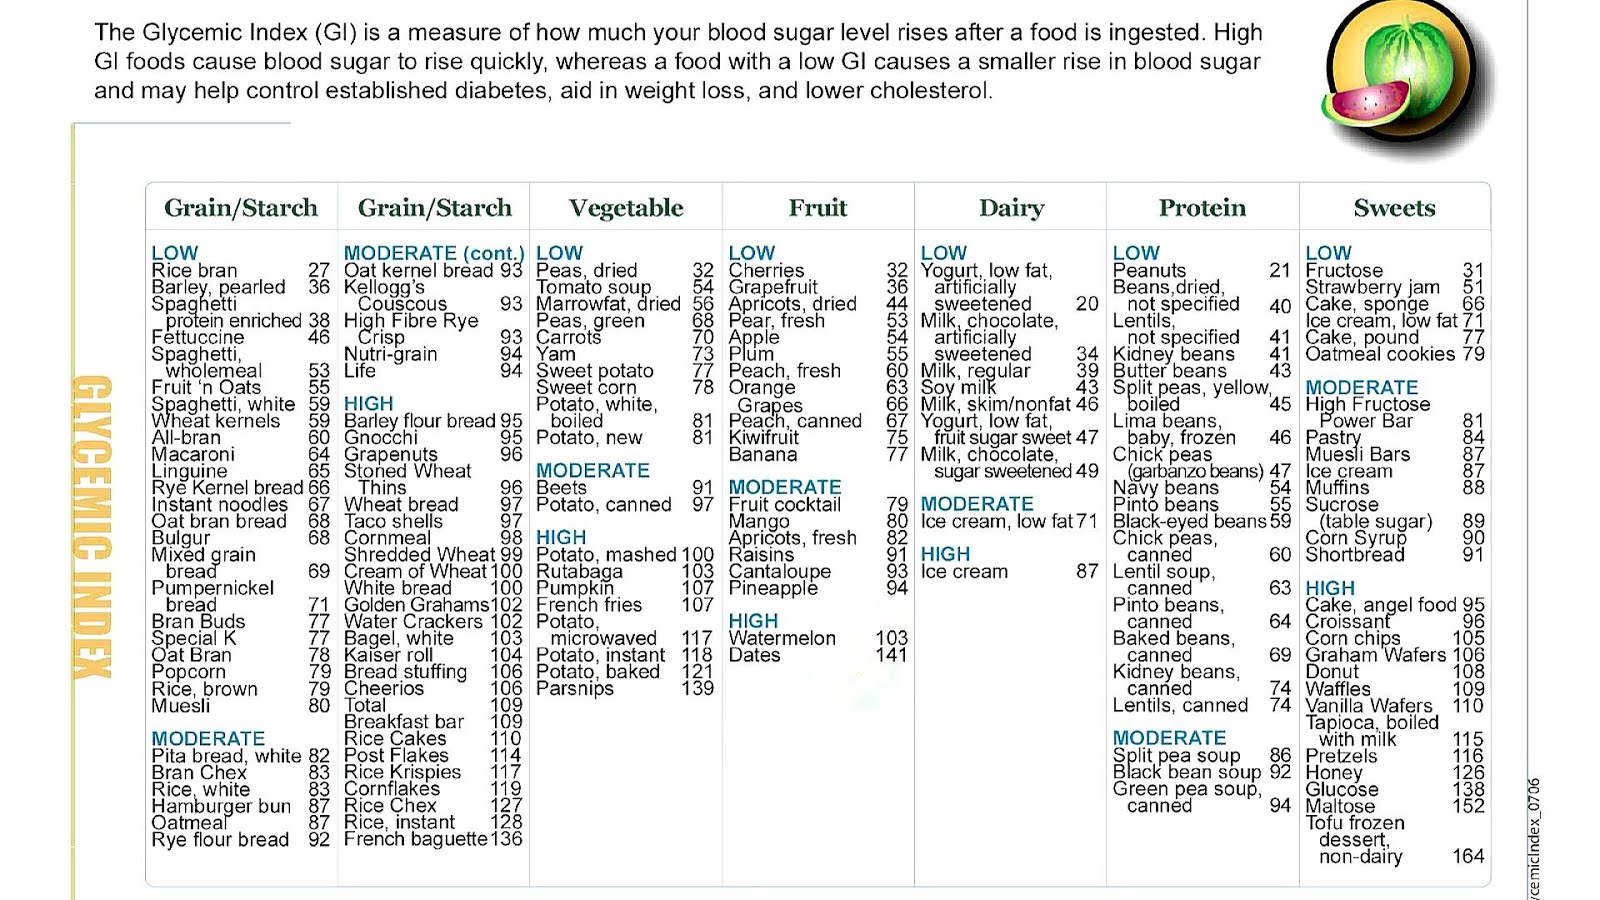 Glycemic Index Fruit Chart Index Choices